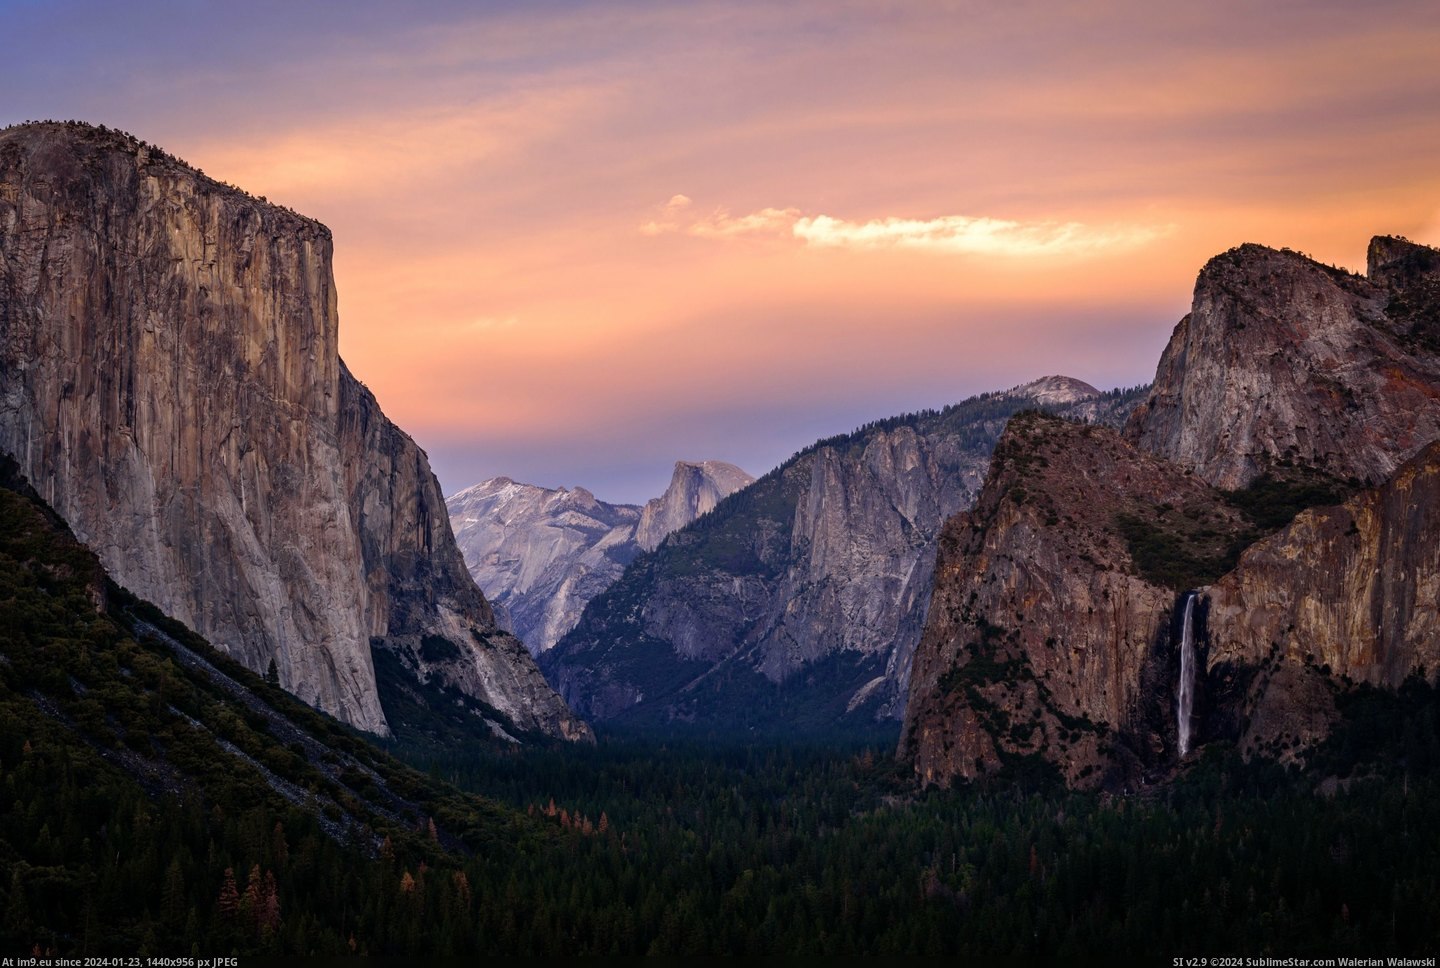 #Park #National #Usa #Yosemite #Tunnel #California #Exposed [Earthporn] The Tunnel View at Yosemite National Park, California, USA [5295x3535] Pic. (Изображение из альбом My r/EARTHPORN favs))